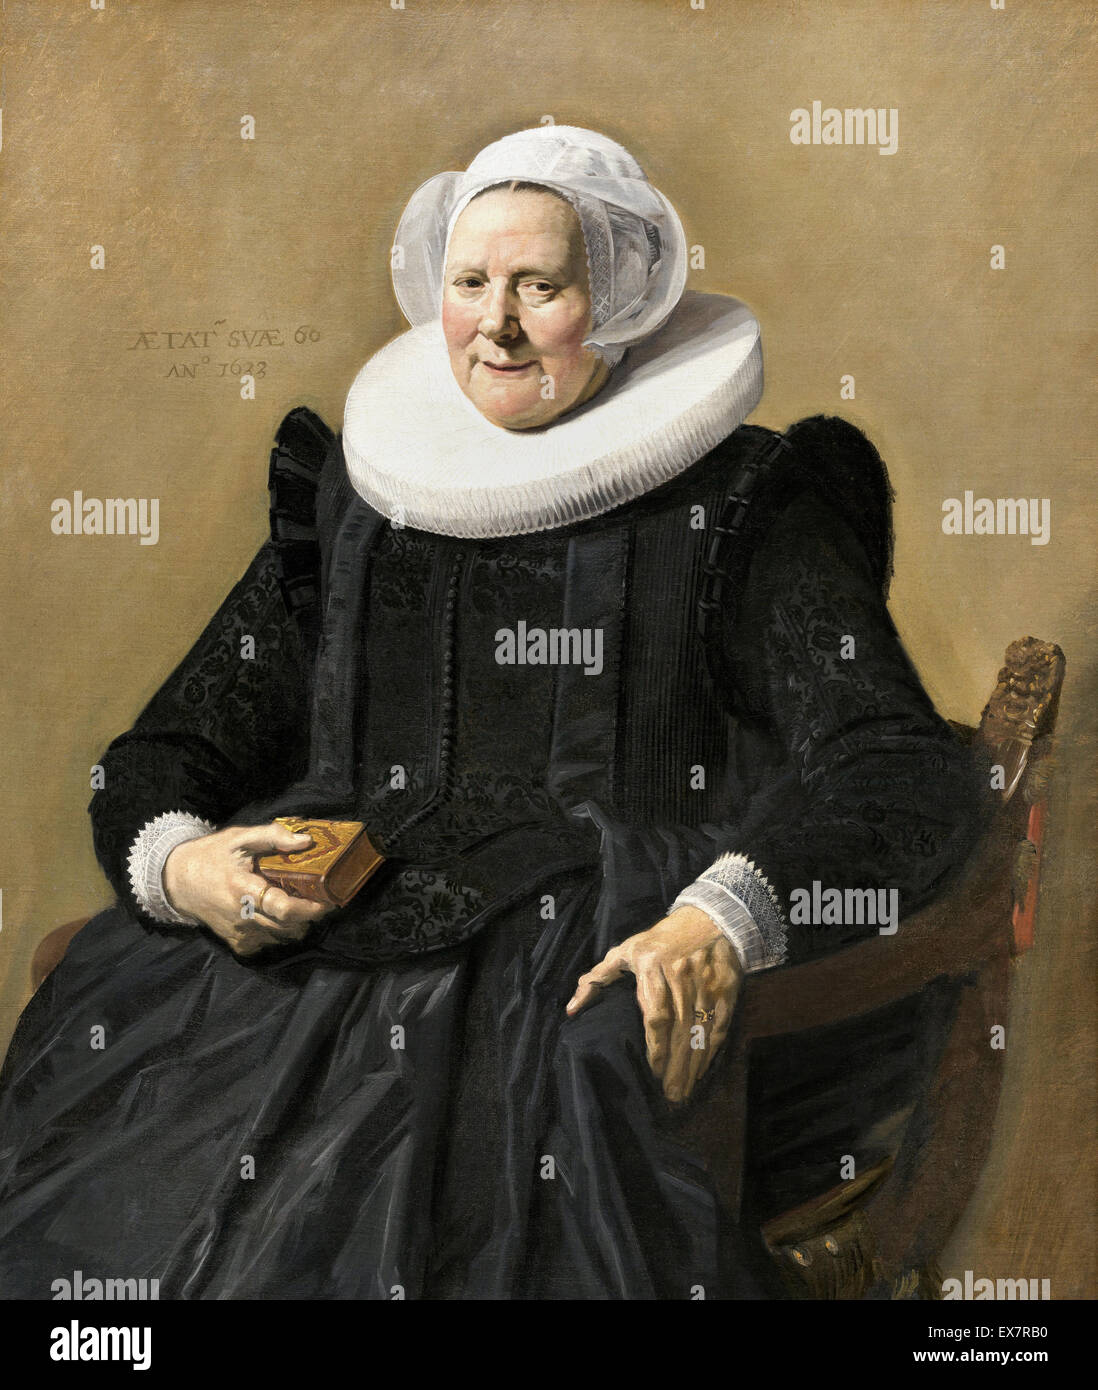 Frans Hals, Portrait of a Woman 1633 Oil on canvas. National Gallery of Art, Washington, D.C., USA. Stock Photo